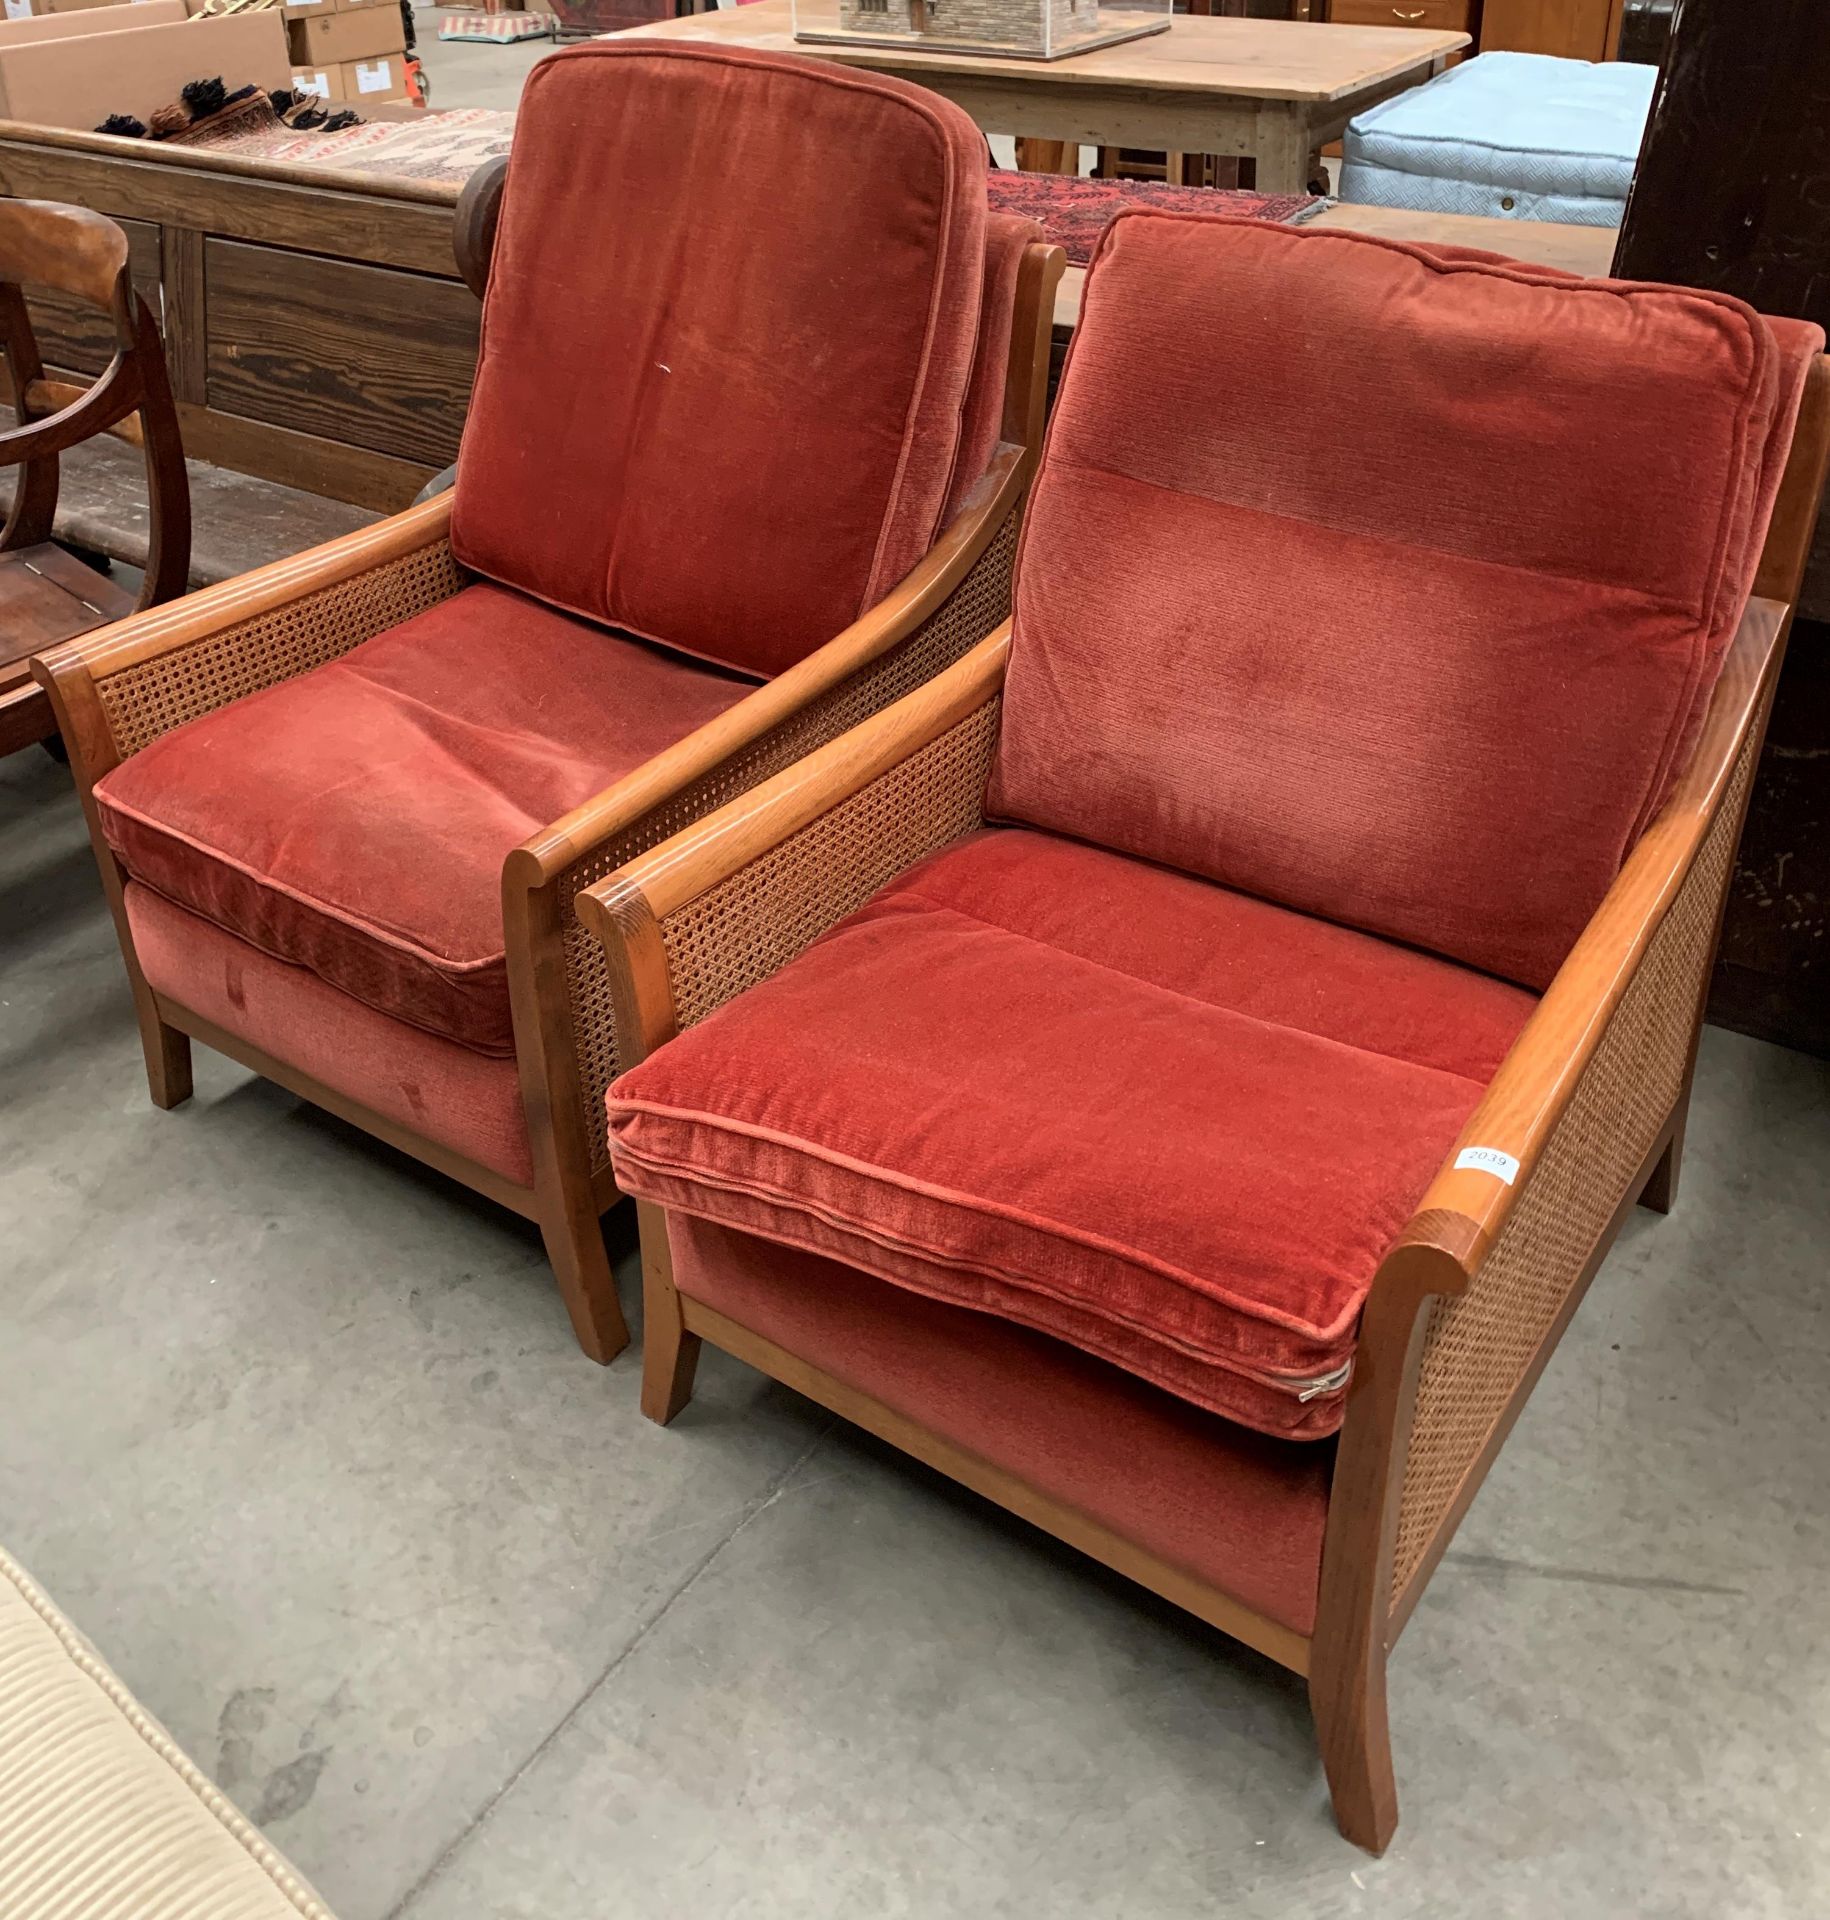 Two Parker Knoll Bergere style medium wood finish armchairs with pink upholstered seat and back